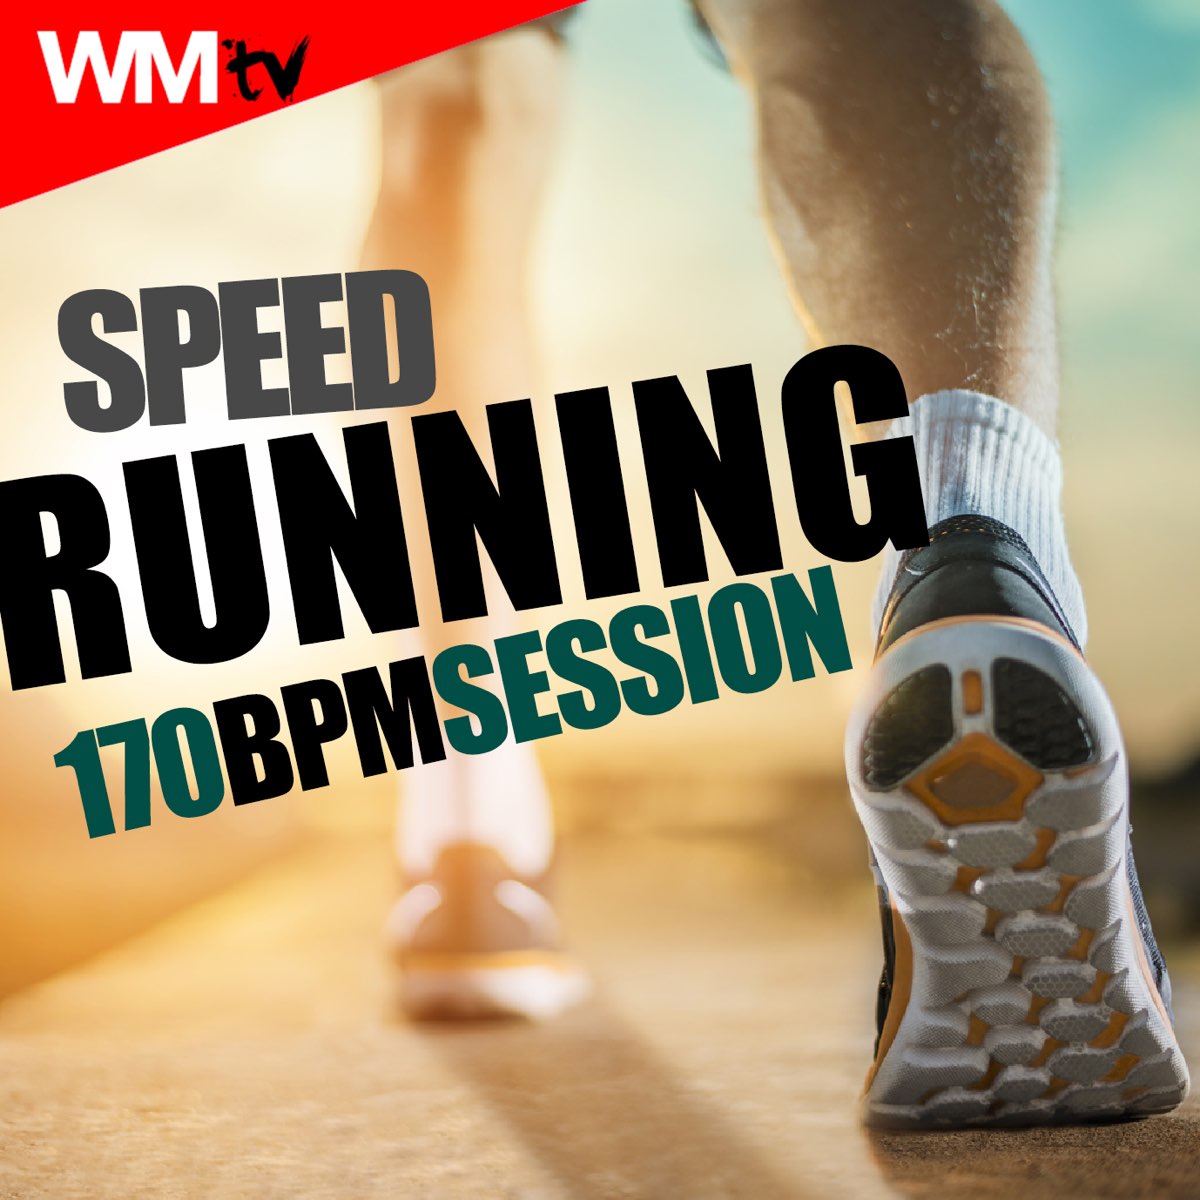 Speed Running 170 Bpm Session (60 Minutes Non-Stop Mixed Compilation for  Fitness & Workout 170 Bpm) - Album di Workout Music TV - Apple Music